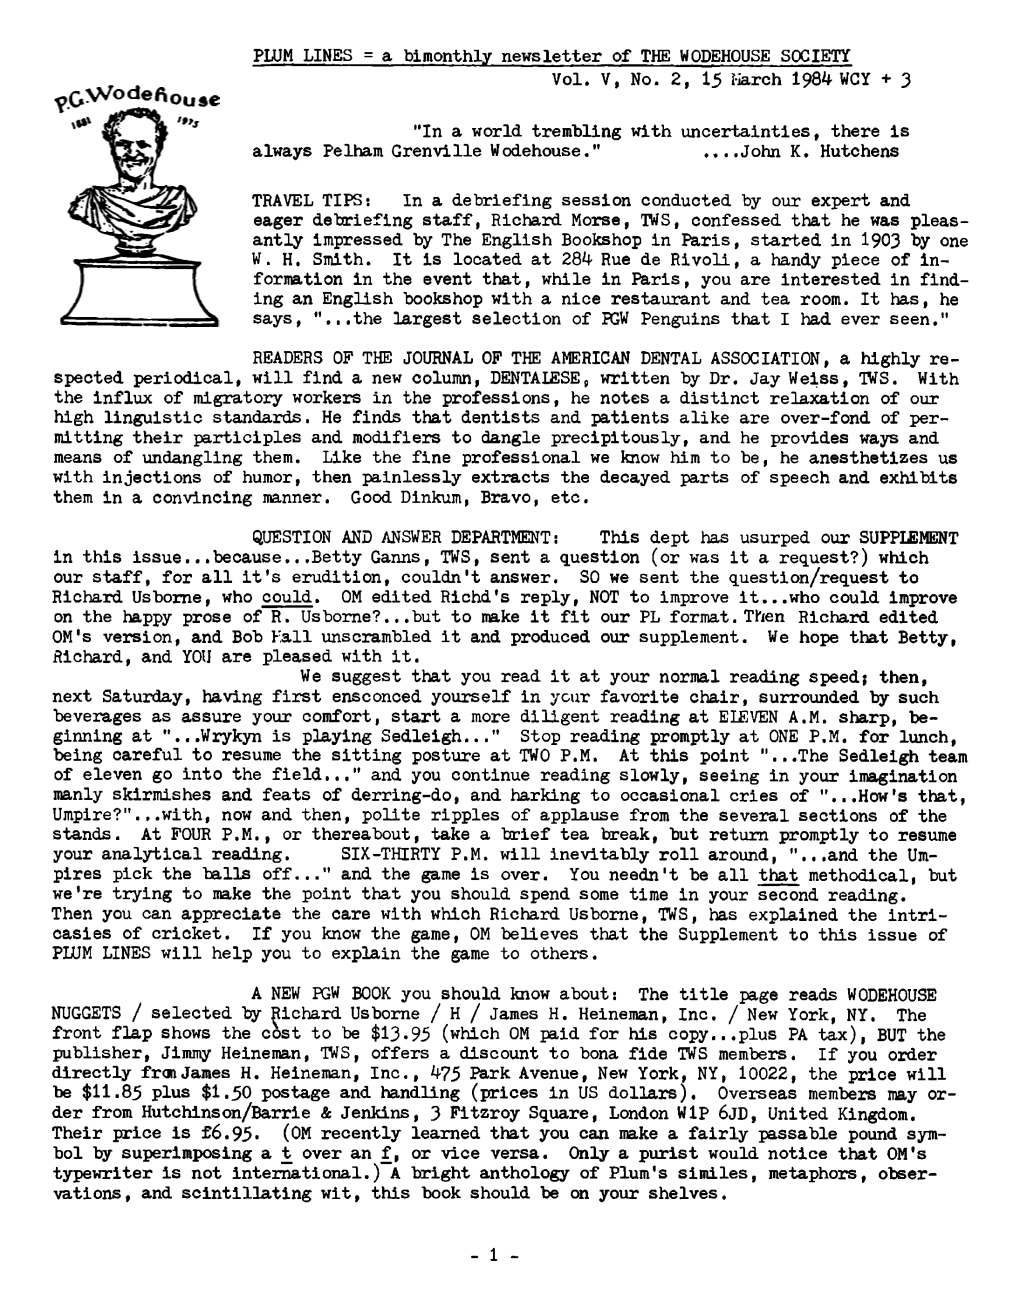 PLUM LINES = a Bimonthly Newsletter of the WODEHOUSE SOCIETY Vol. V, No. 2, 15 March 1984- WCY + 3 "In a World Trembling Wi